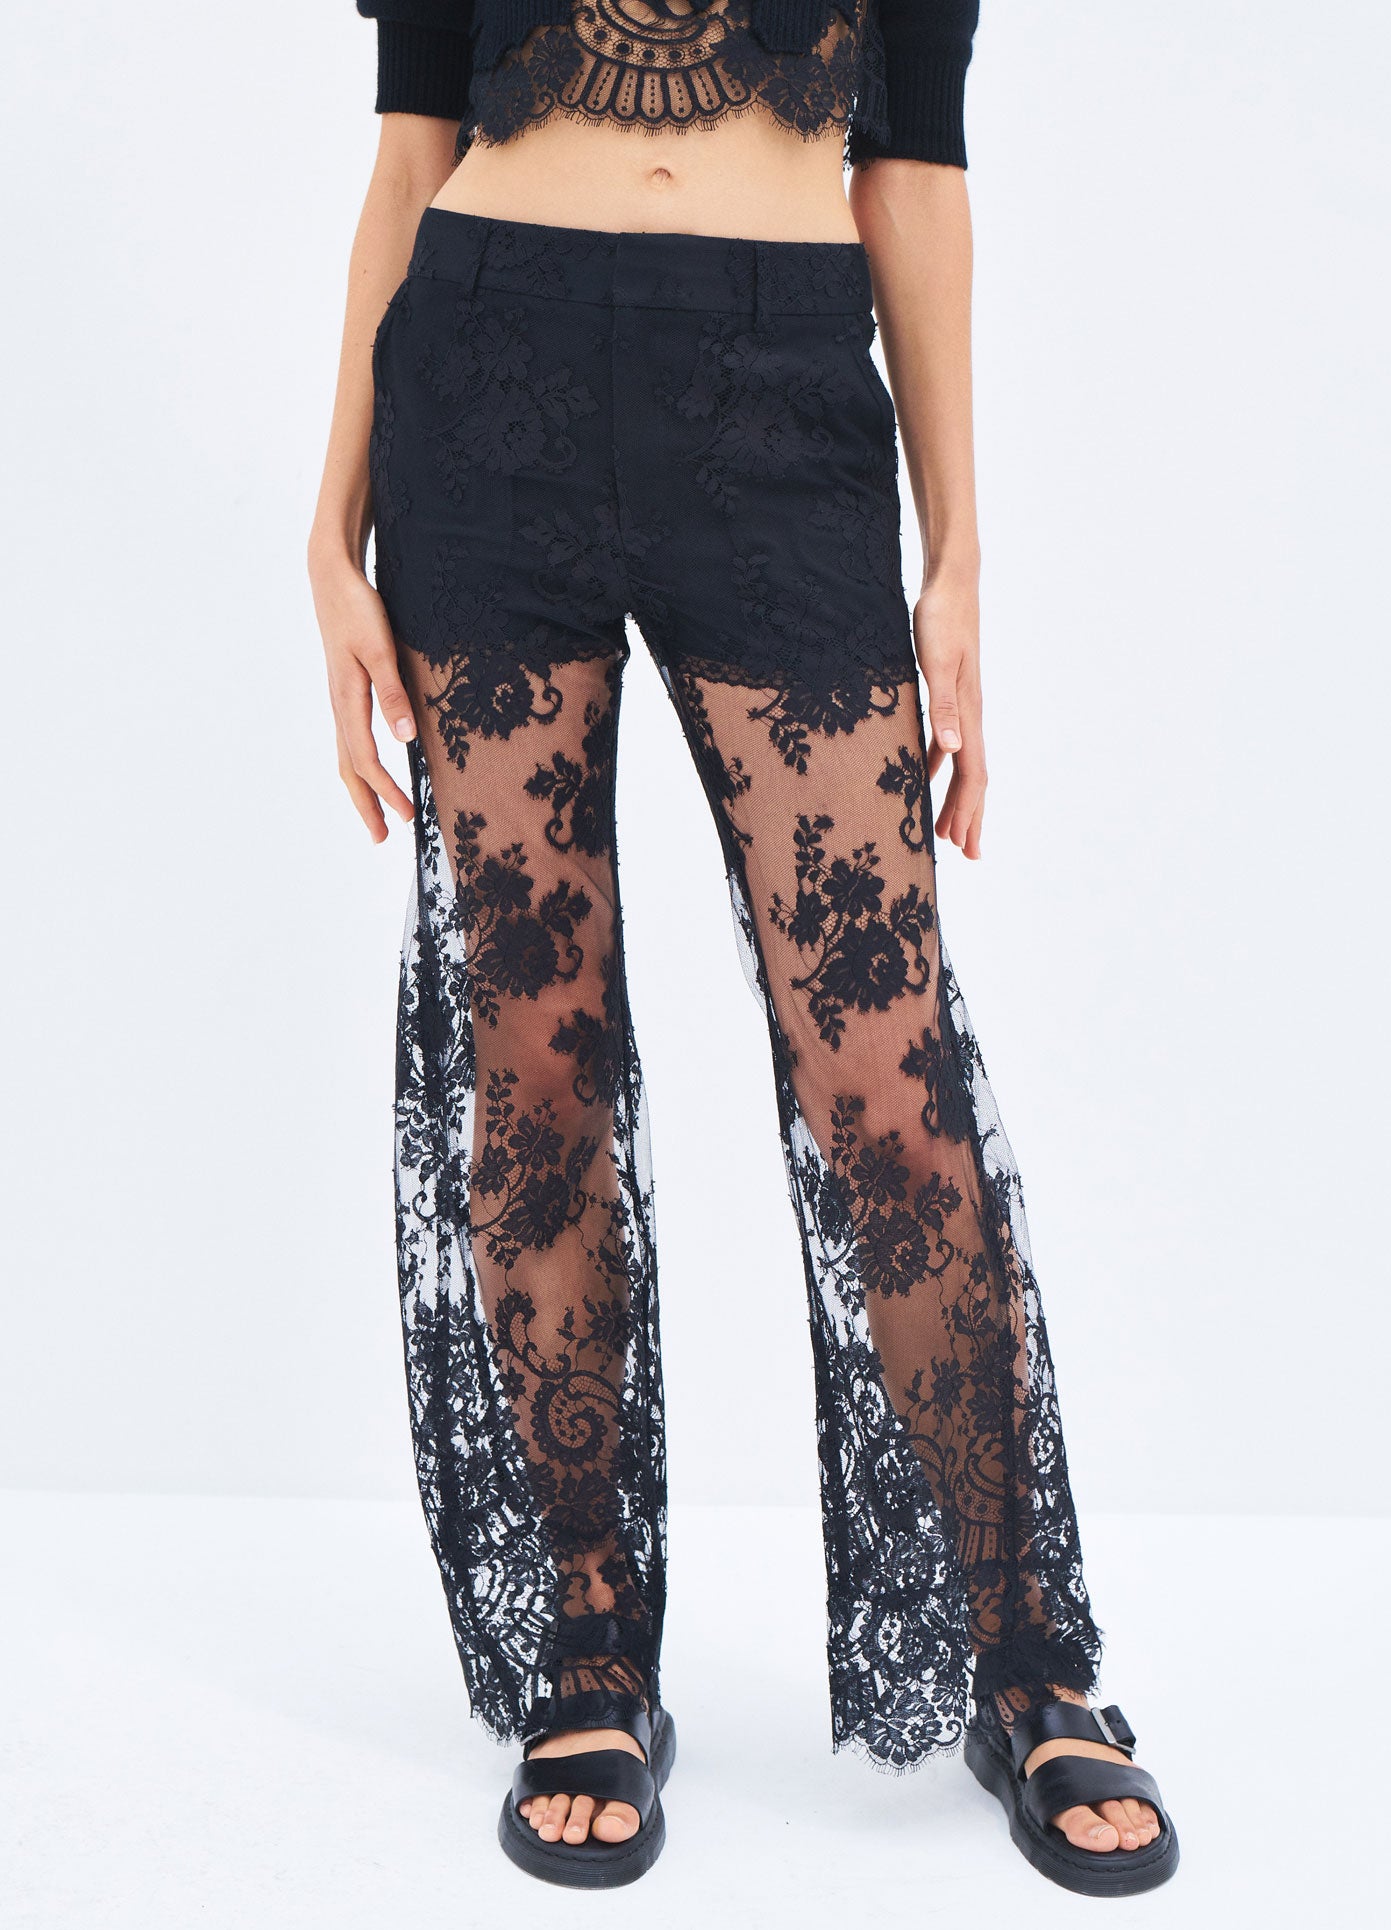 MONSE Spring 2024 Floral Lace Pant in Black on model front bottoms view